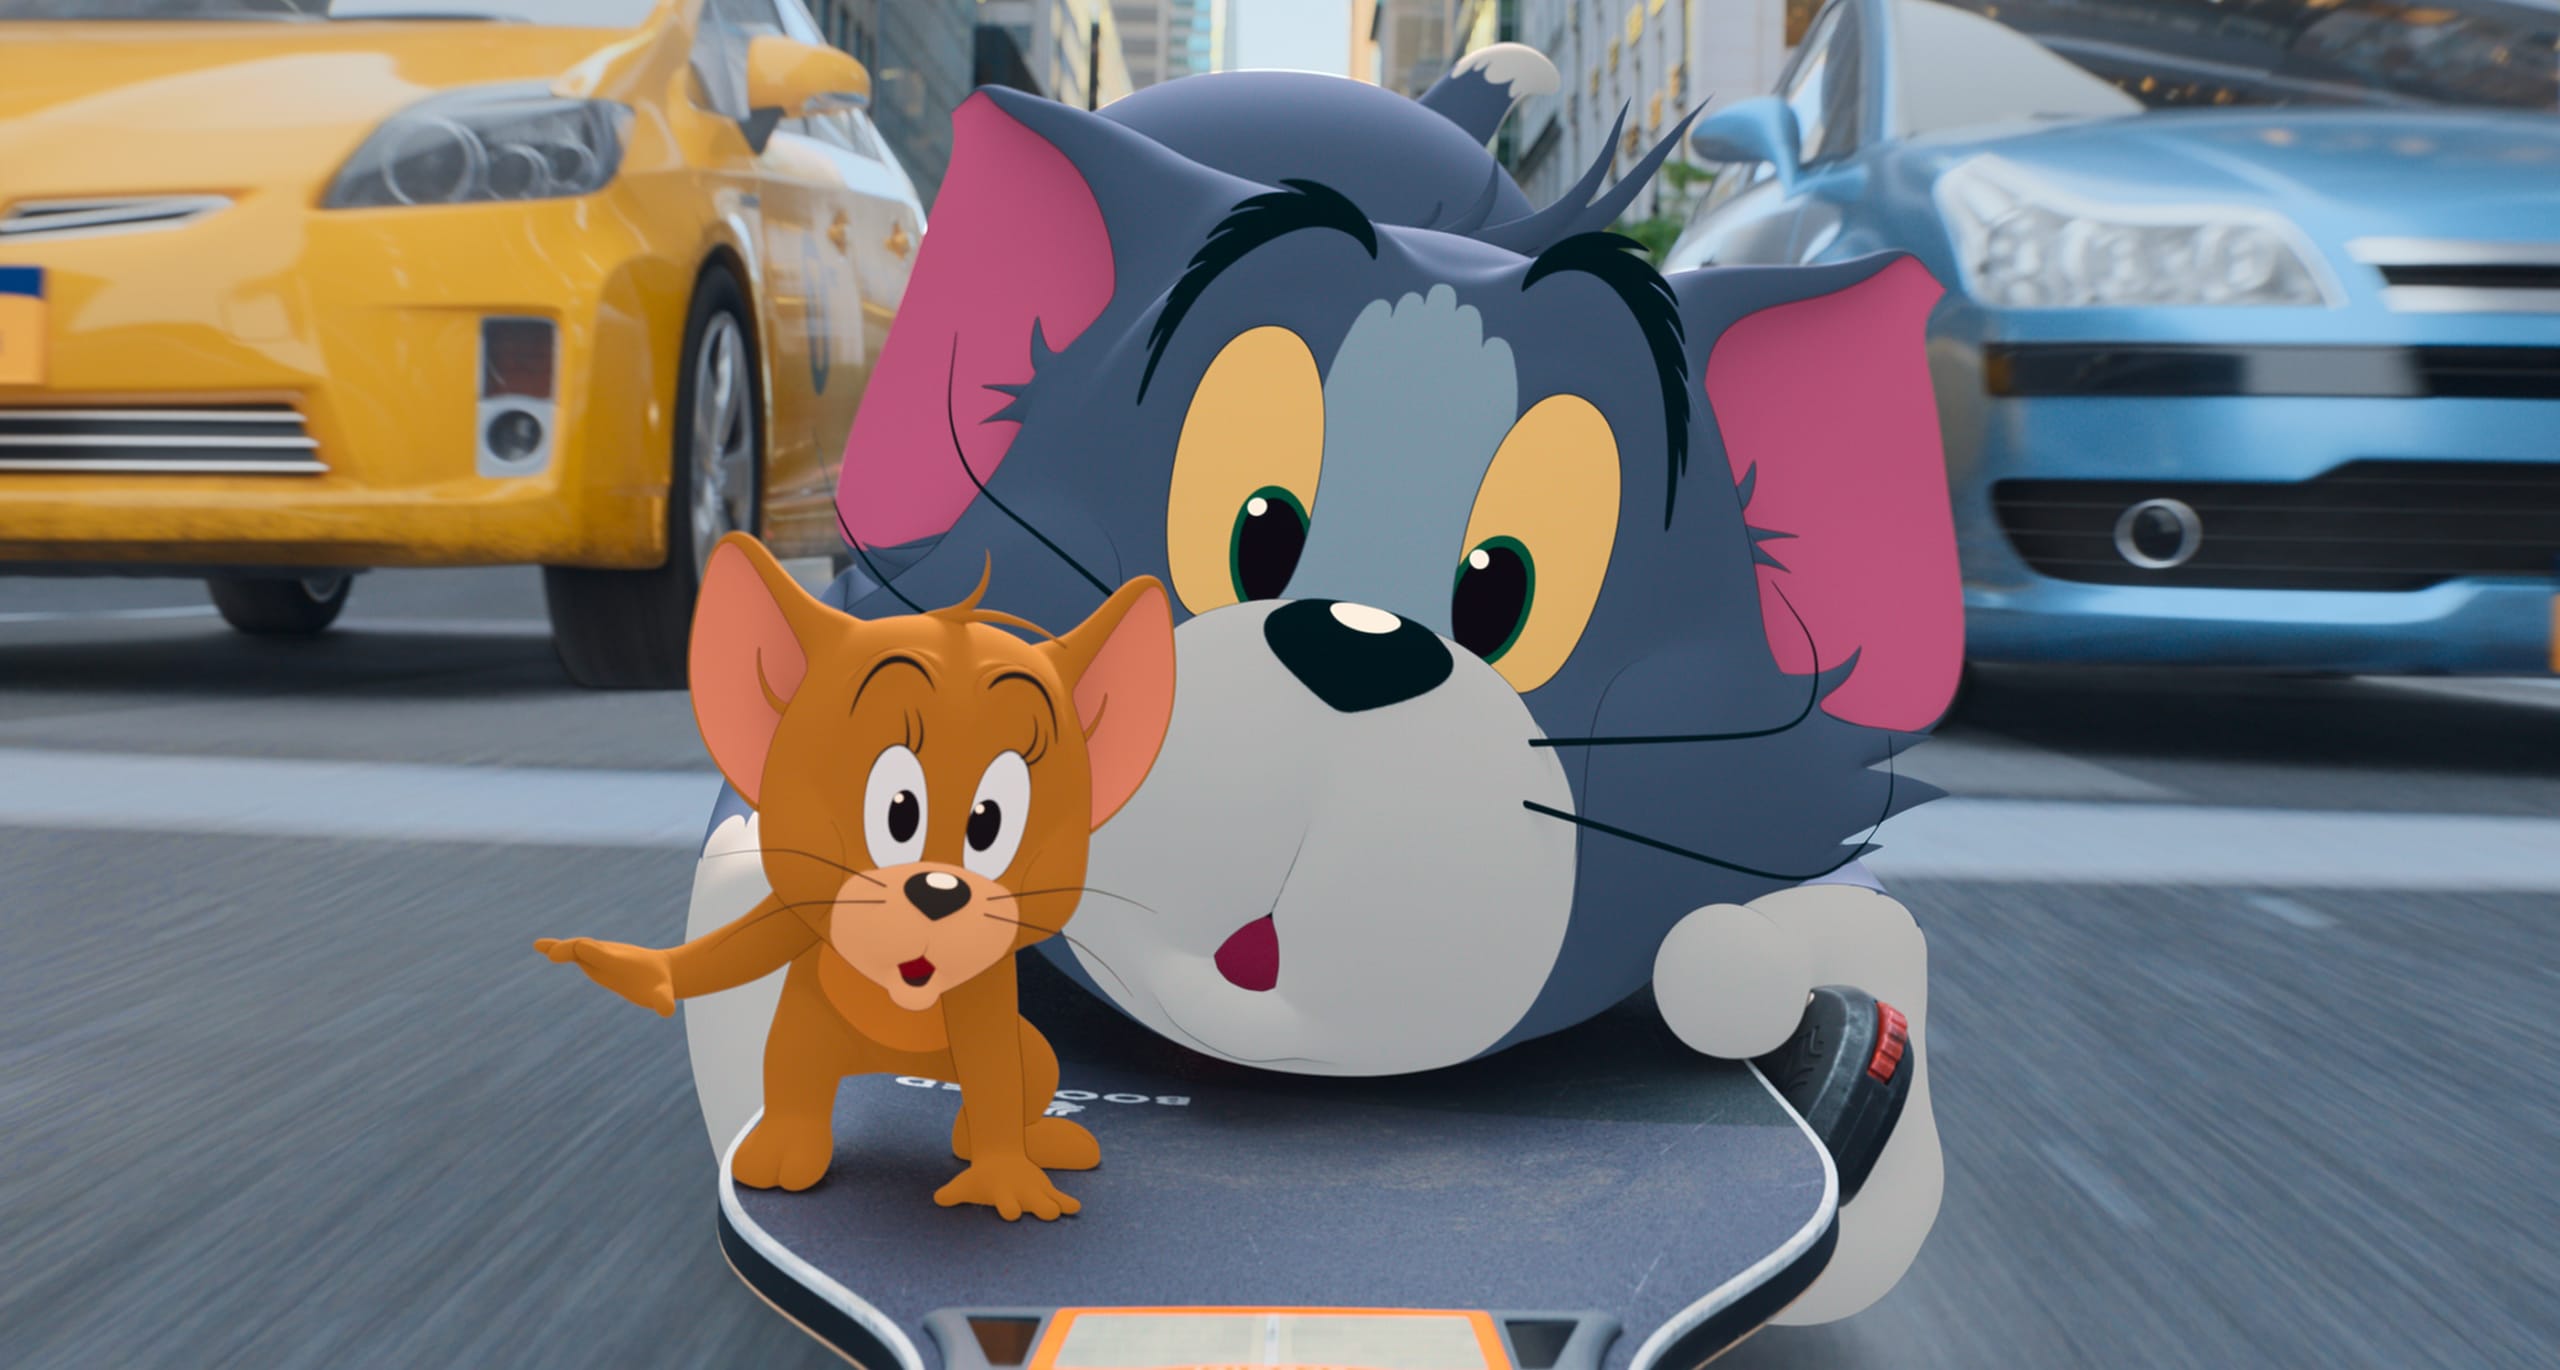 Tom and Jerry Movie Review